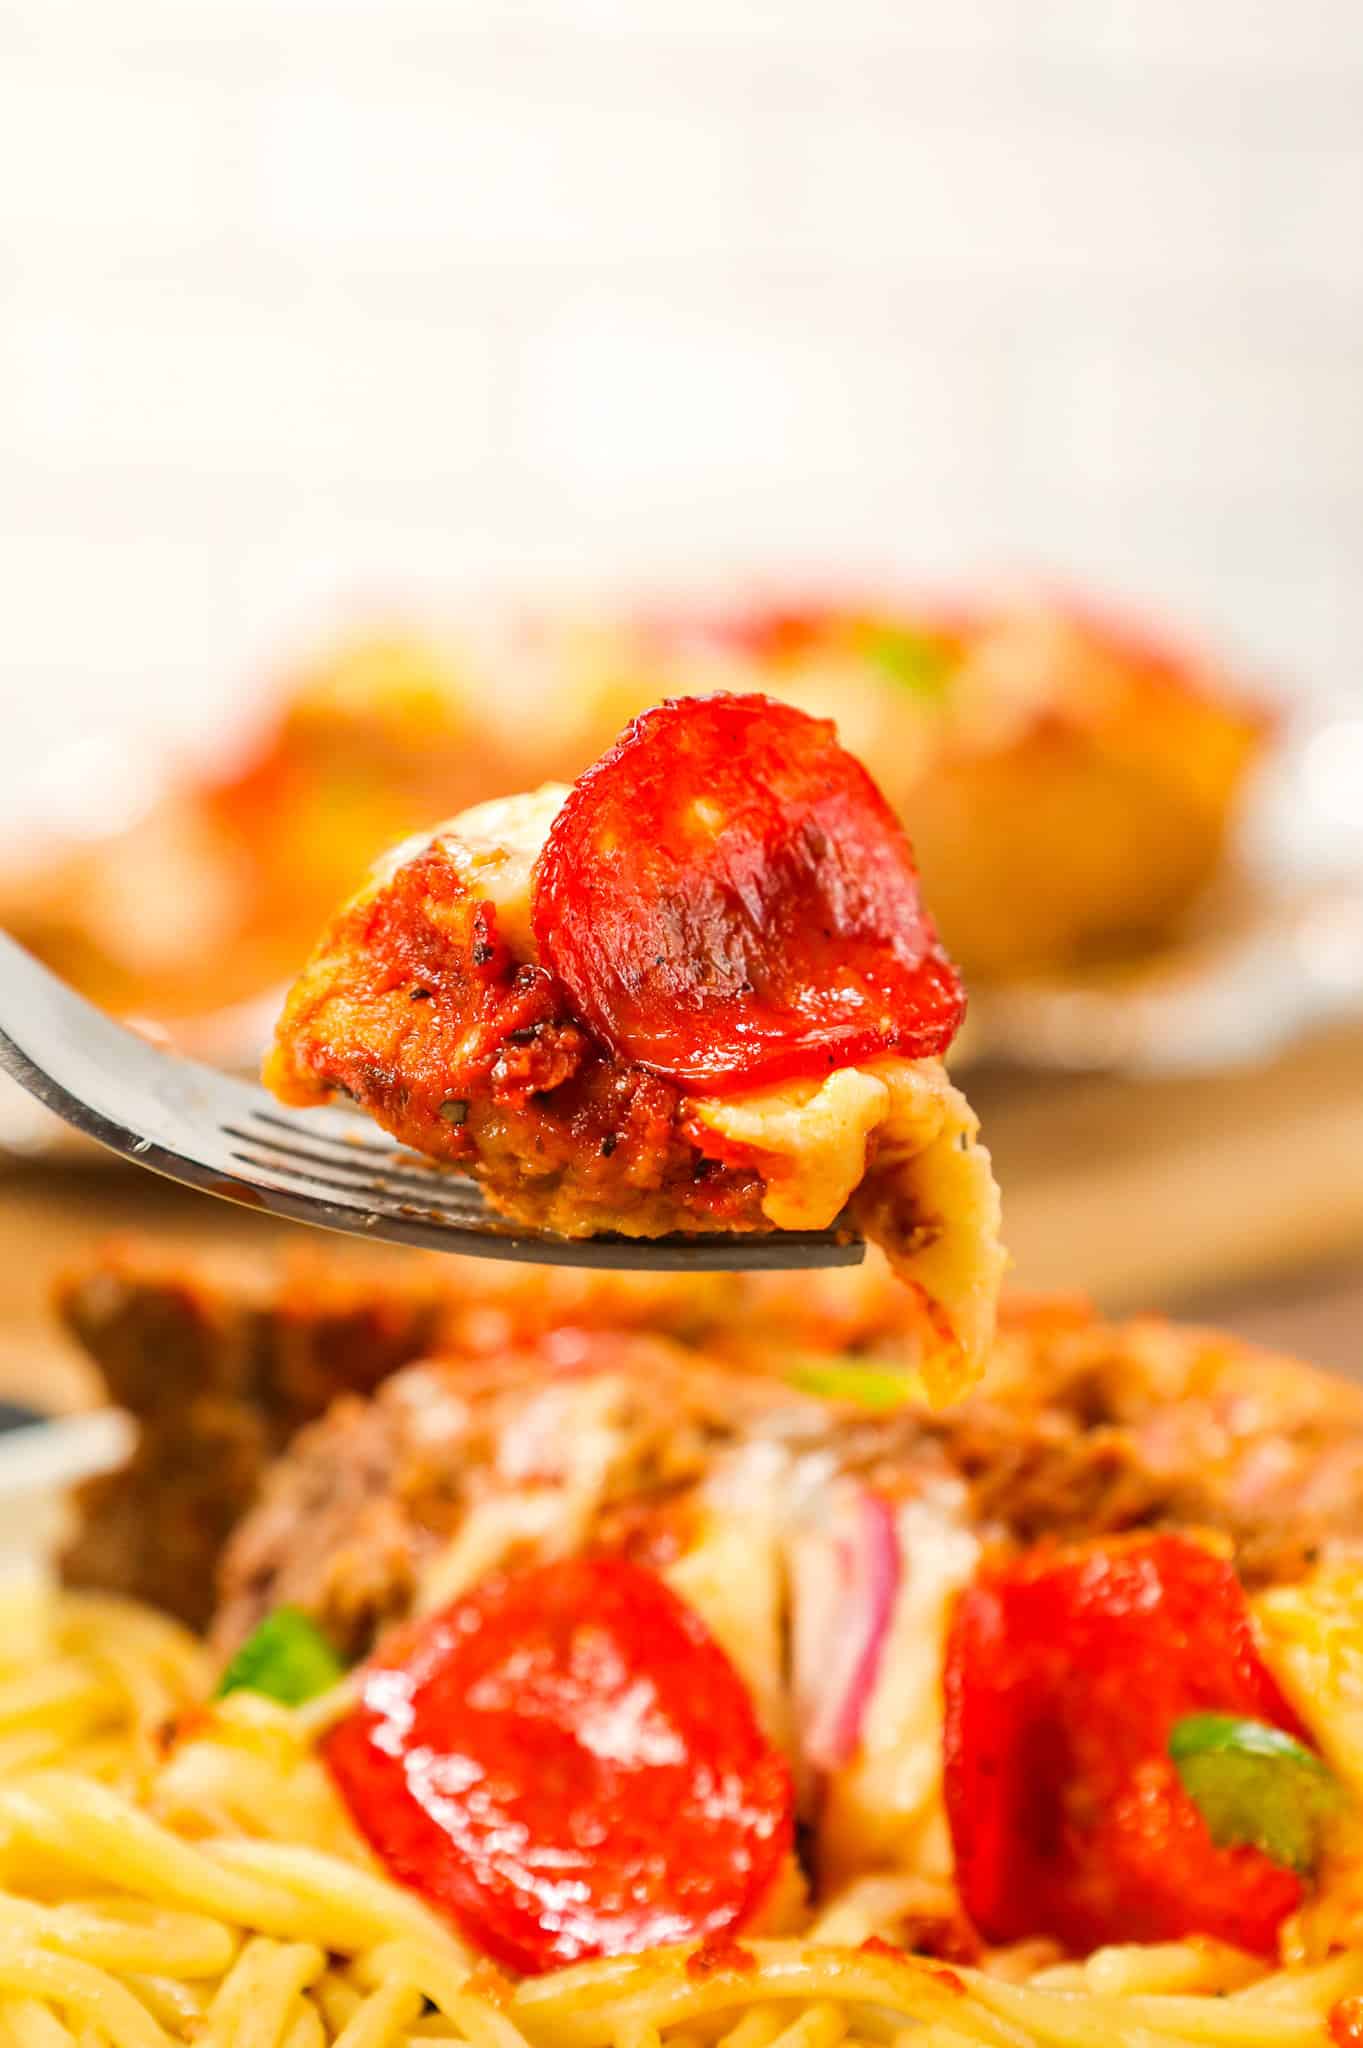 Pizza Meatloaf is a delicious ground beef meatloaf loaded with mozzarella cheese, pizza sauce, pepperoni slices, diced green peppers and red onions.